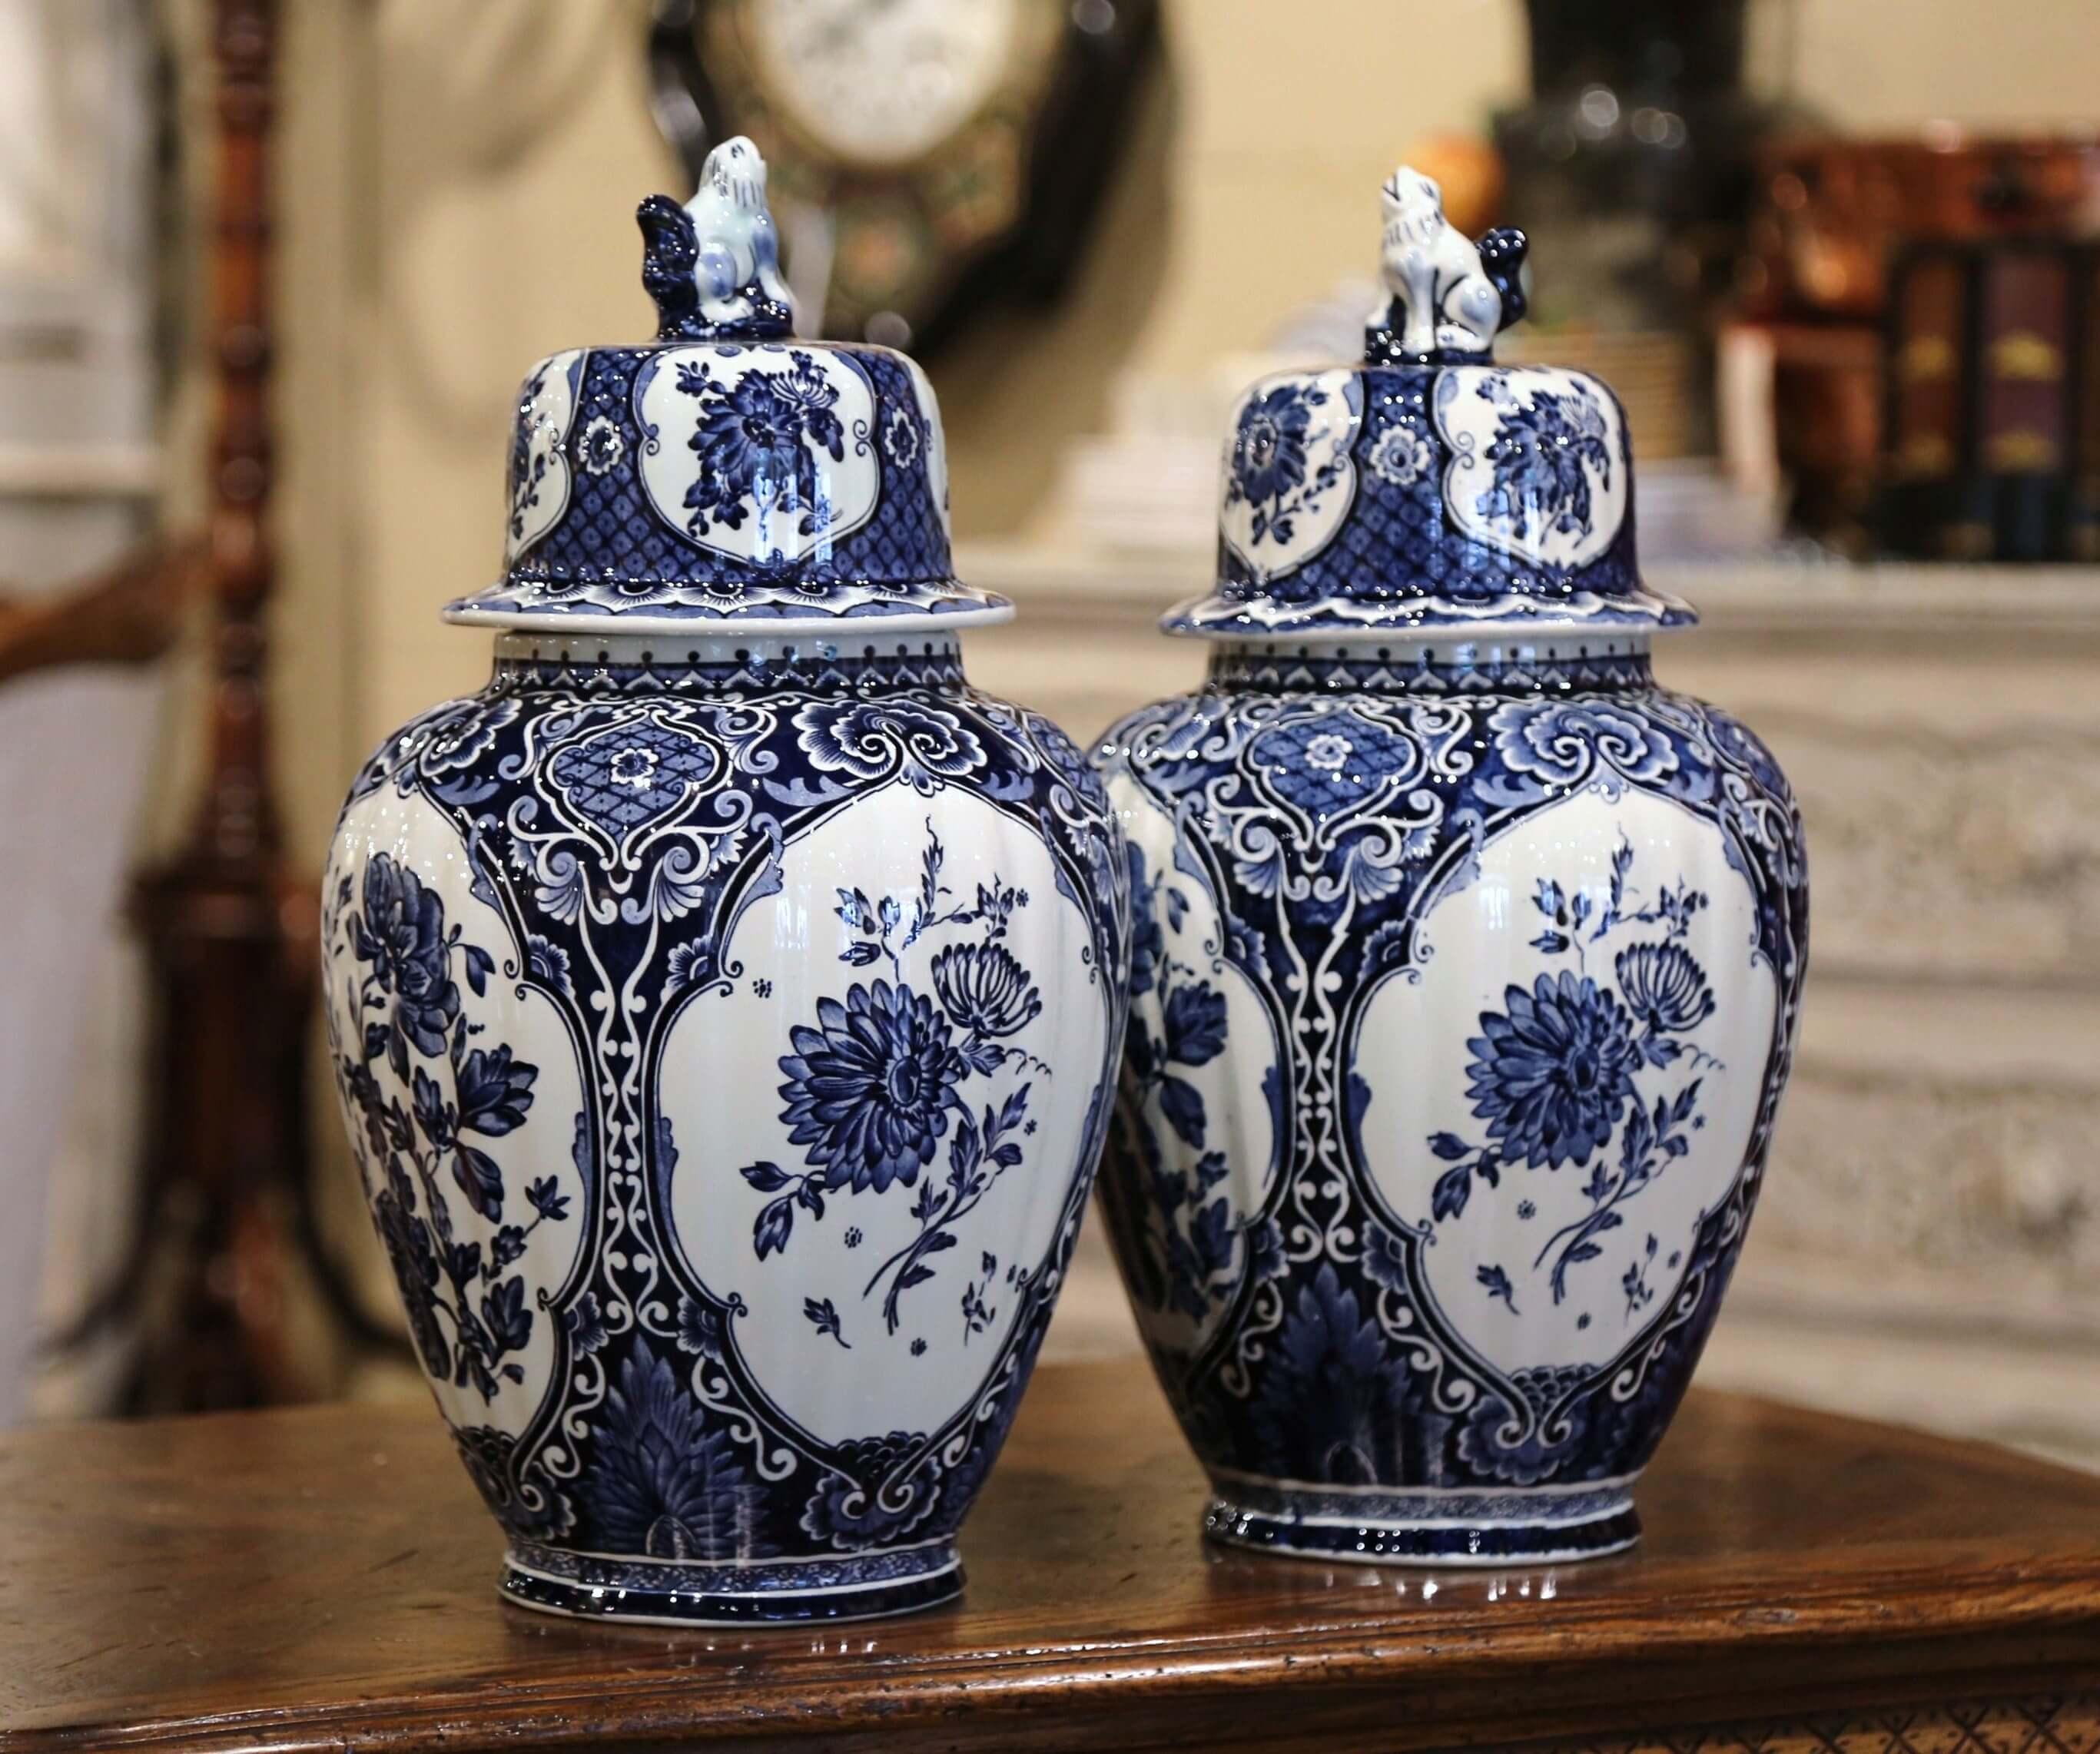 Place this elegant pair of antique ceramic ginger jars on a mantel or a console in entryway. Crafted in Holland, circa 1960, the traditional blue and white jars are round in shape and have a cone lid embellished with dog figure at the top; each